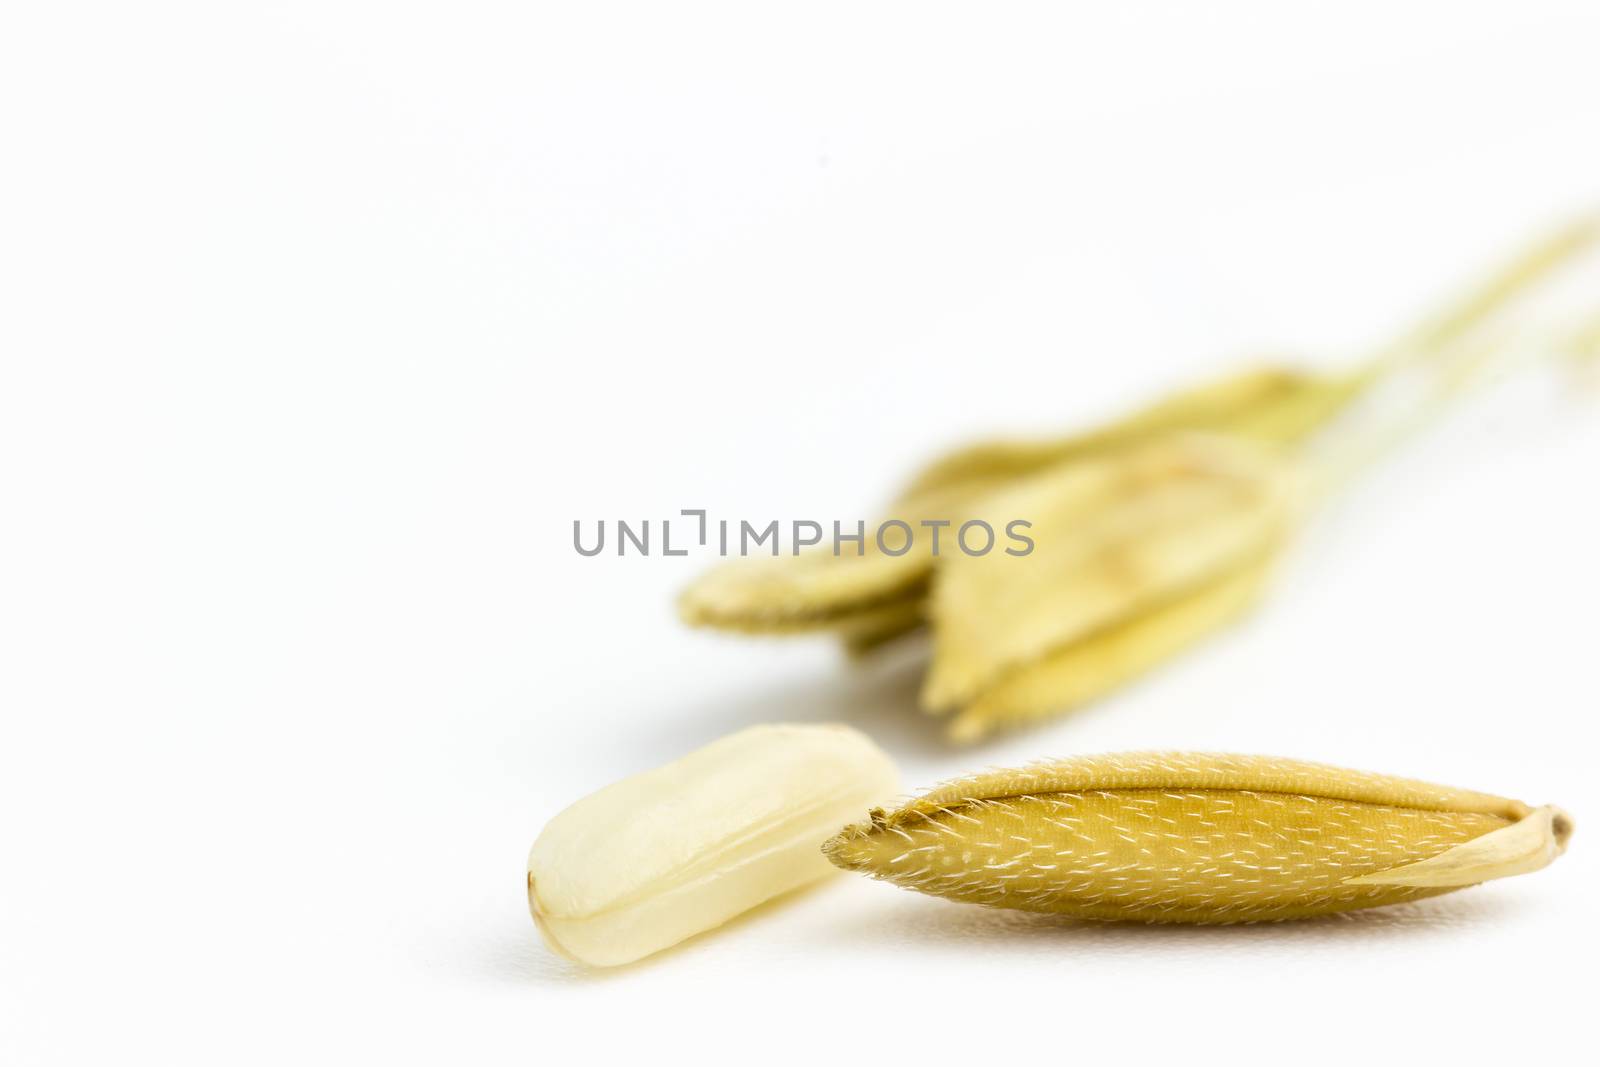 Closeup yellow rice seed on a white background.